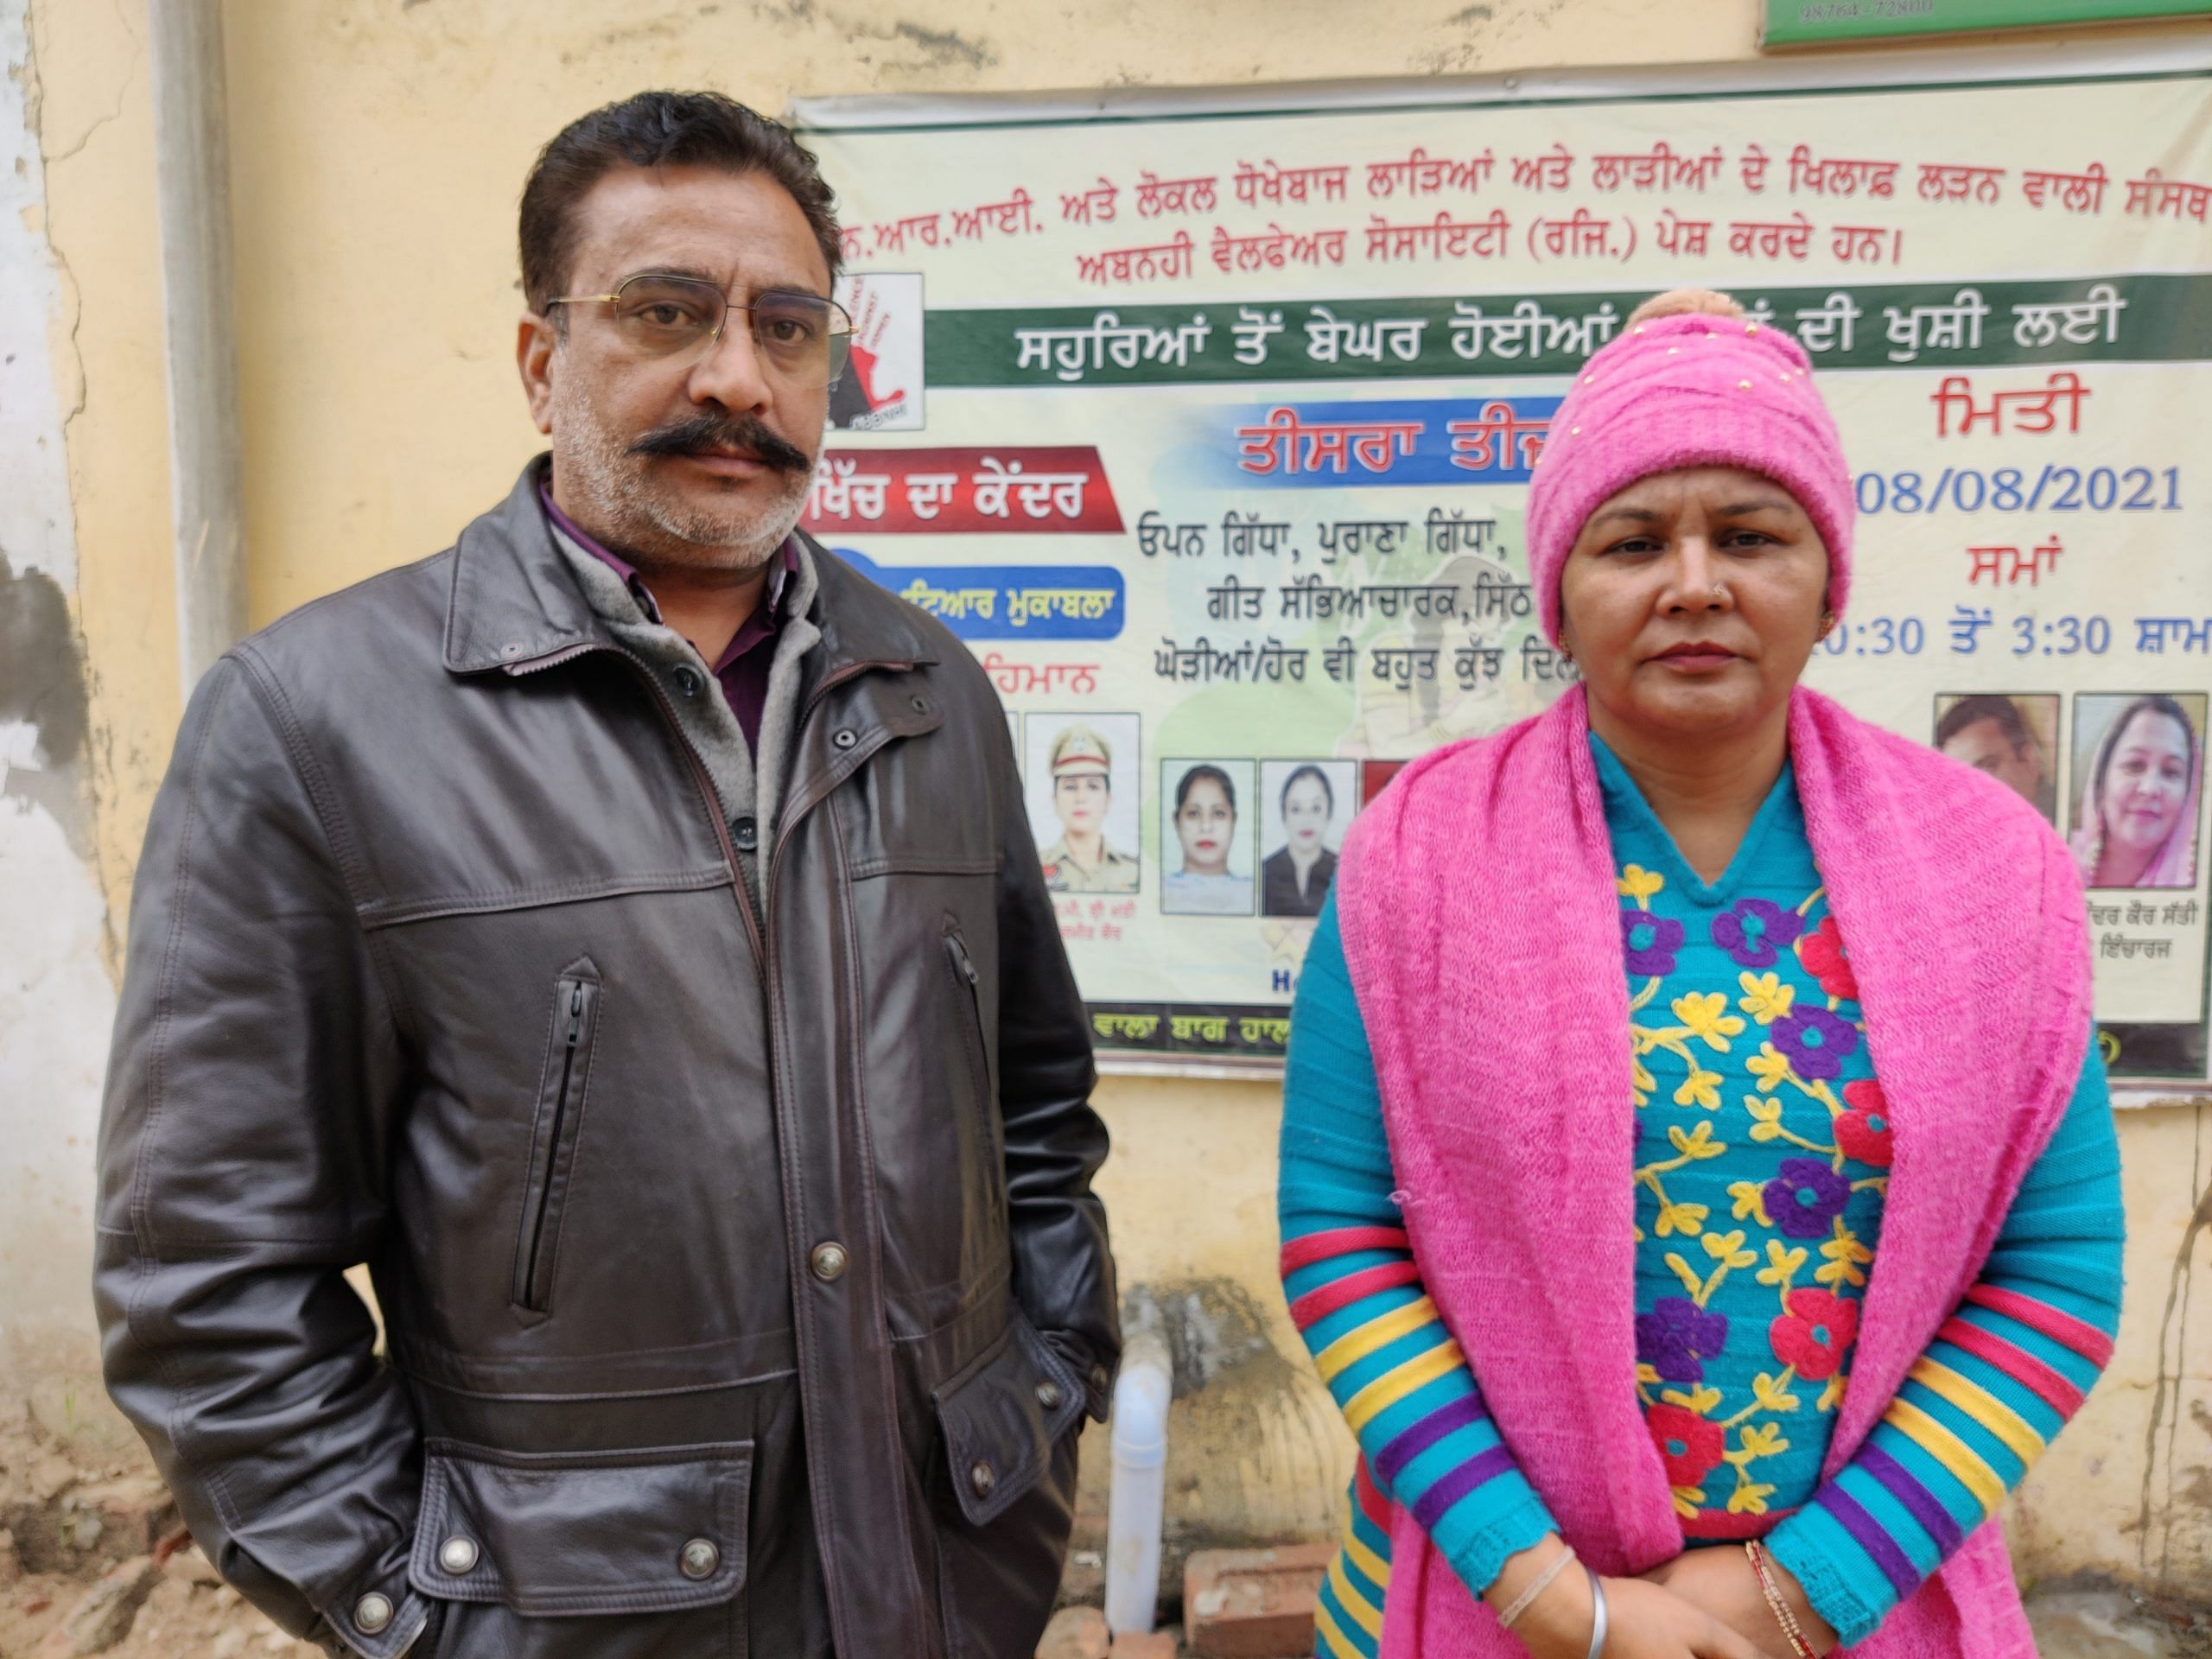  Rakesh Sharma (Chairman) and Satwinder Kaur Satti (founder) of ABBNHI NGO who help abandoned spouses settle marriages at their office in Toosa village, Ludhiana | Shubhangi Misra | ThePrint 